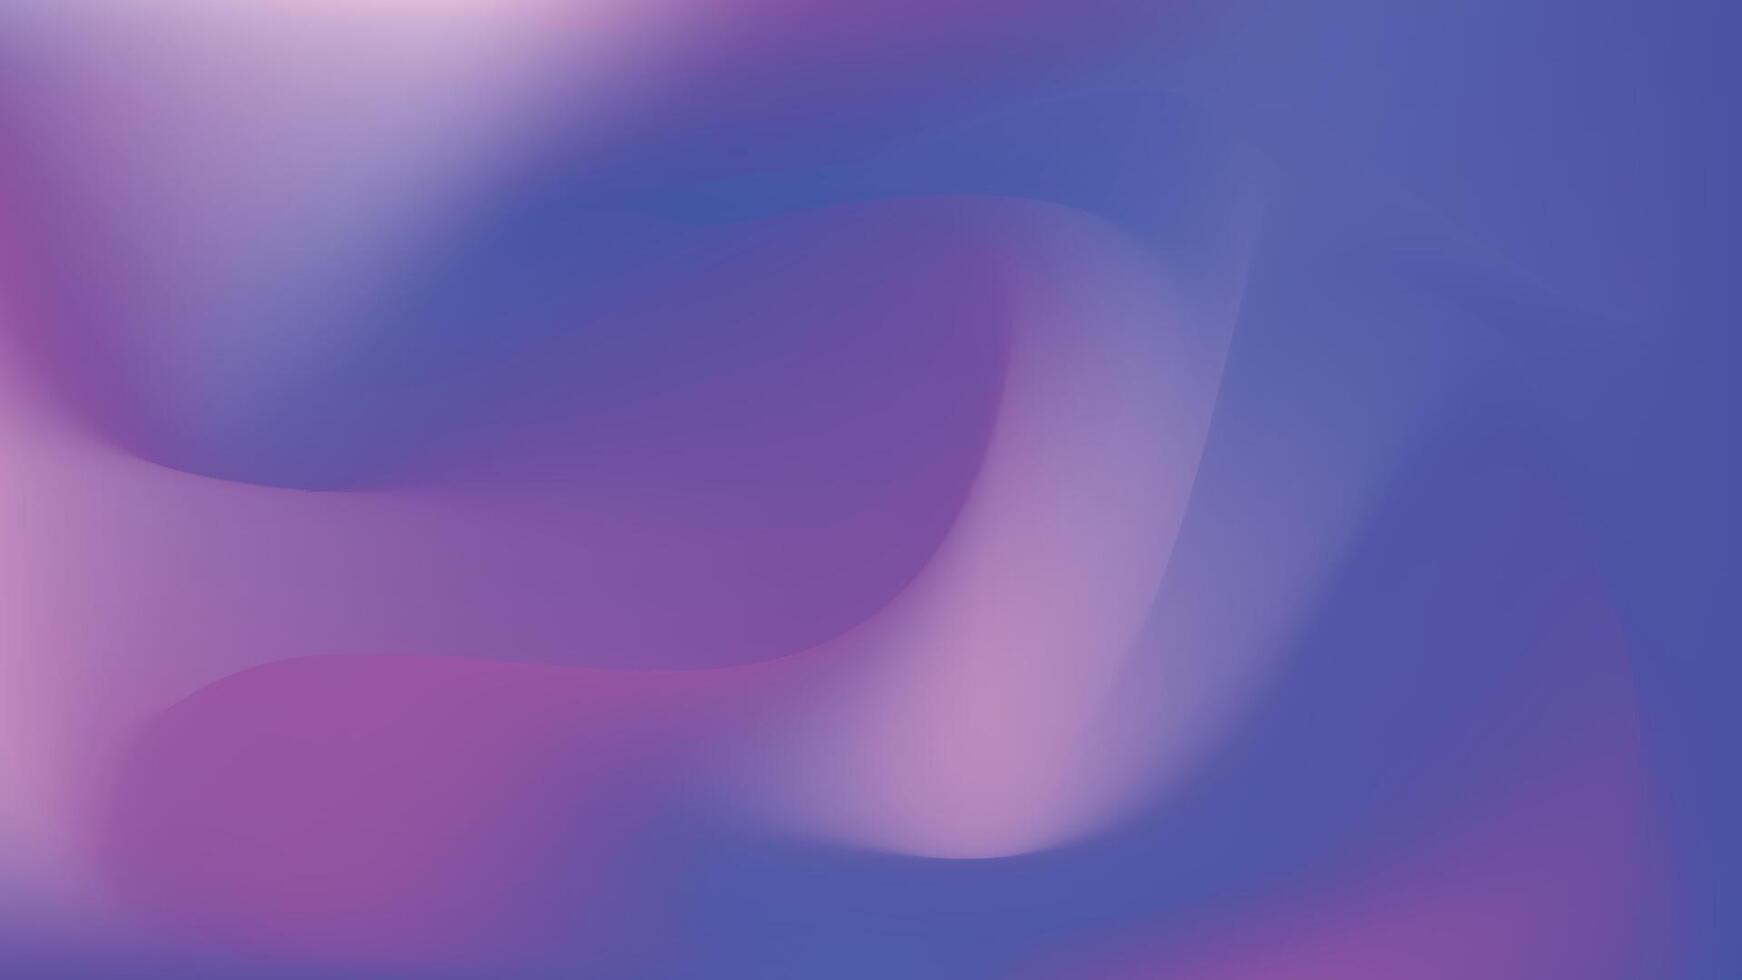 purple and pink gradient background with wave pattern vector